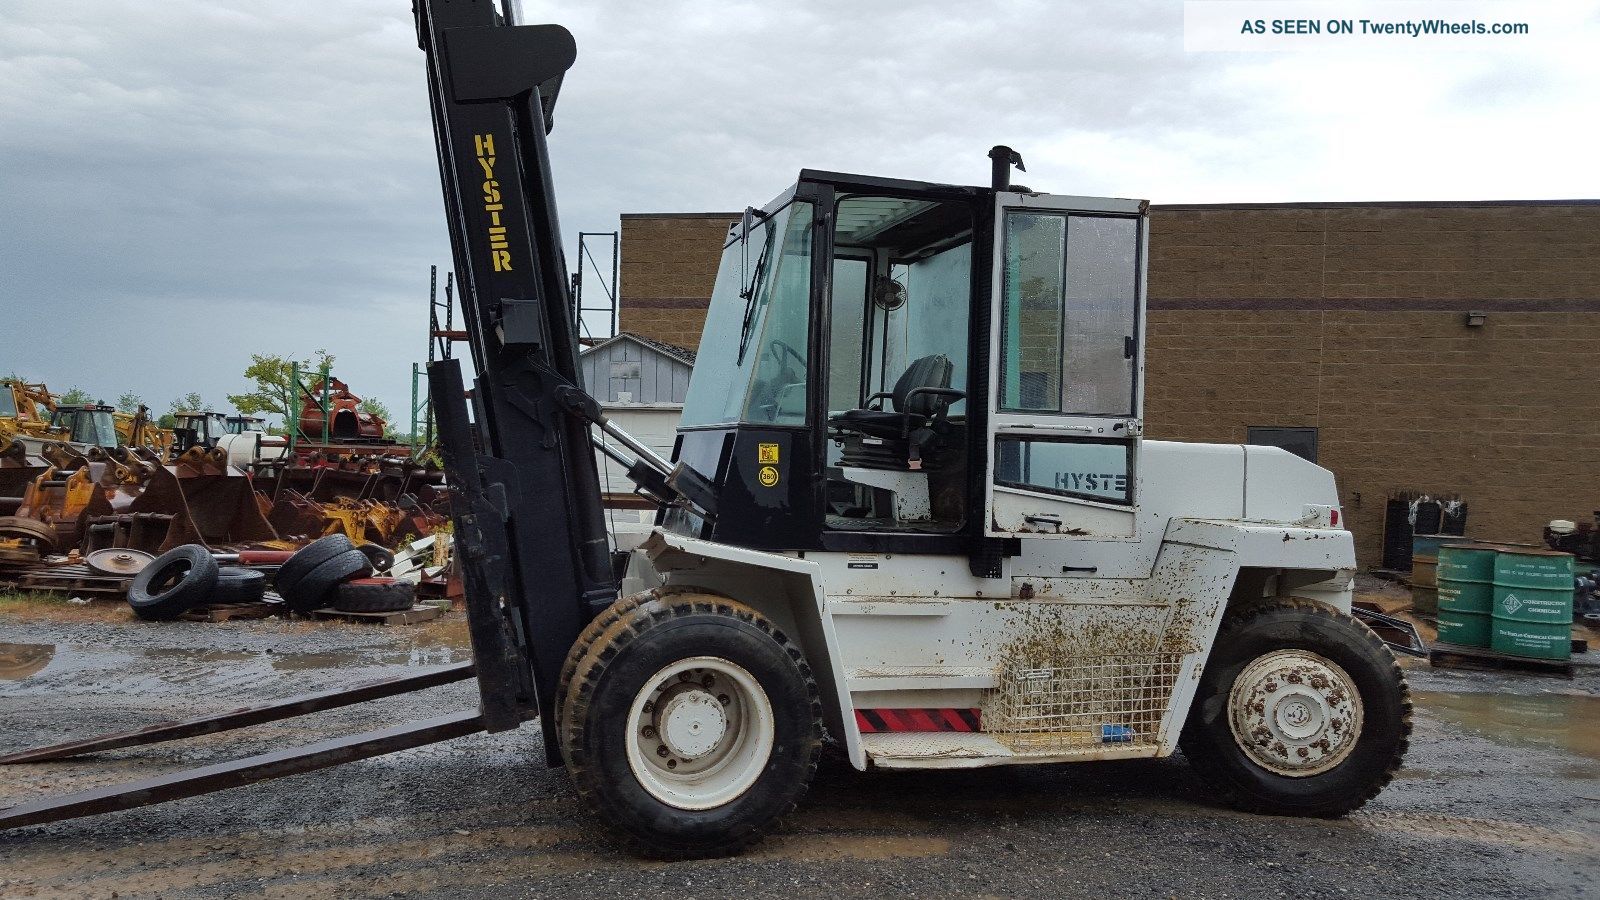 used small forklift